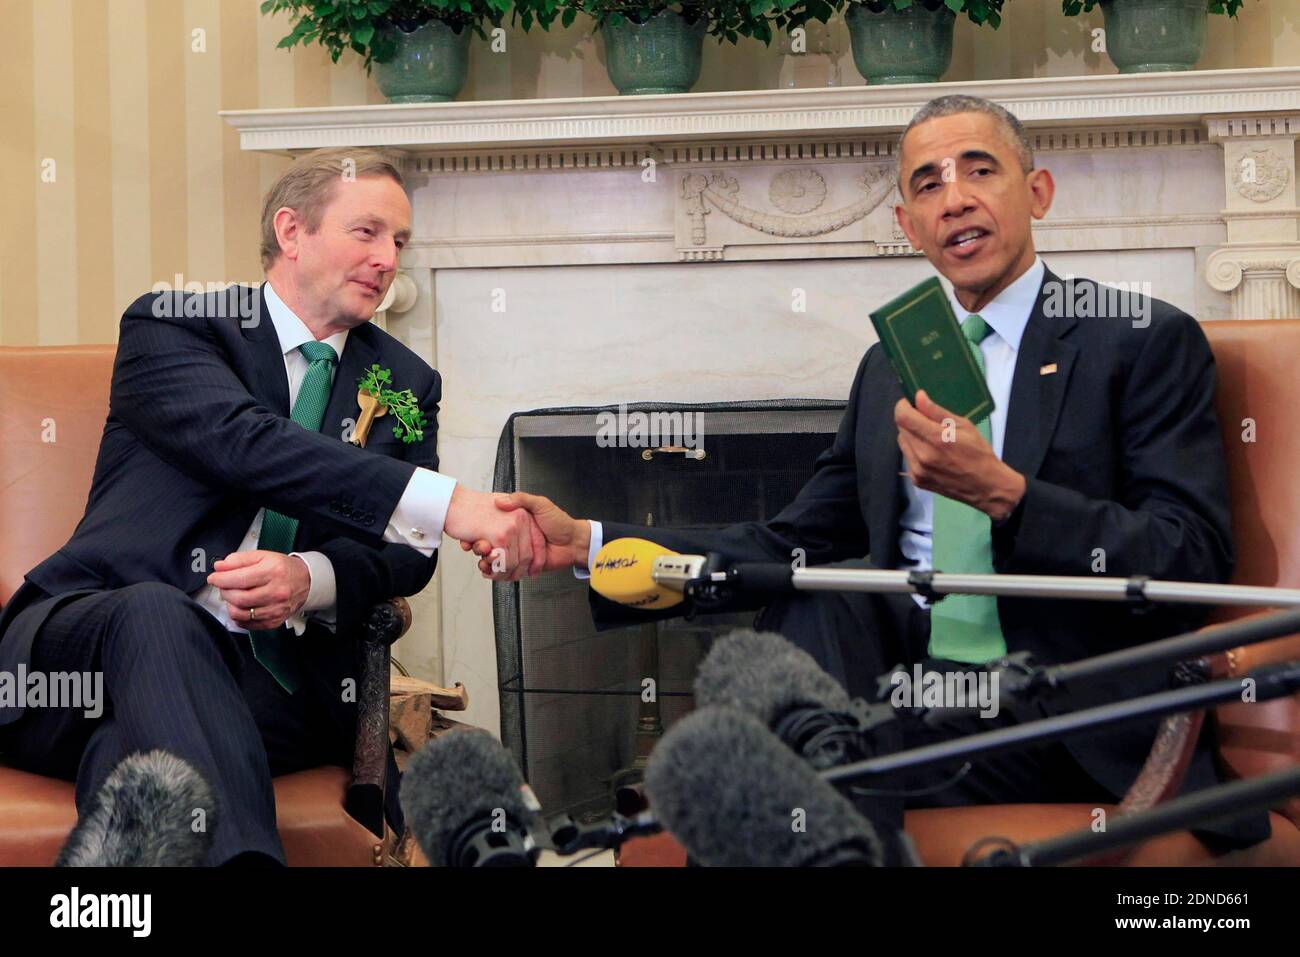 the President and the Vice President meet with Prime Minister (Taoiseach) Enda Kenny of Ireland in the Oval Office. President Obama is holding a book by Yates--a gift from the Prime Minister. Washington, DC, USA, on March 17, 2015. Photo by Dennis Brack/Pool/ABACAPRESS.COM Stock Photo